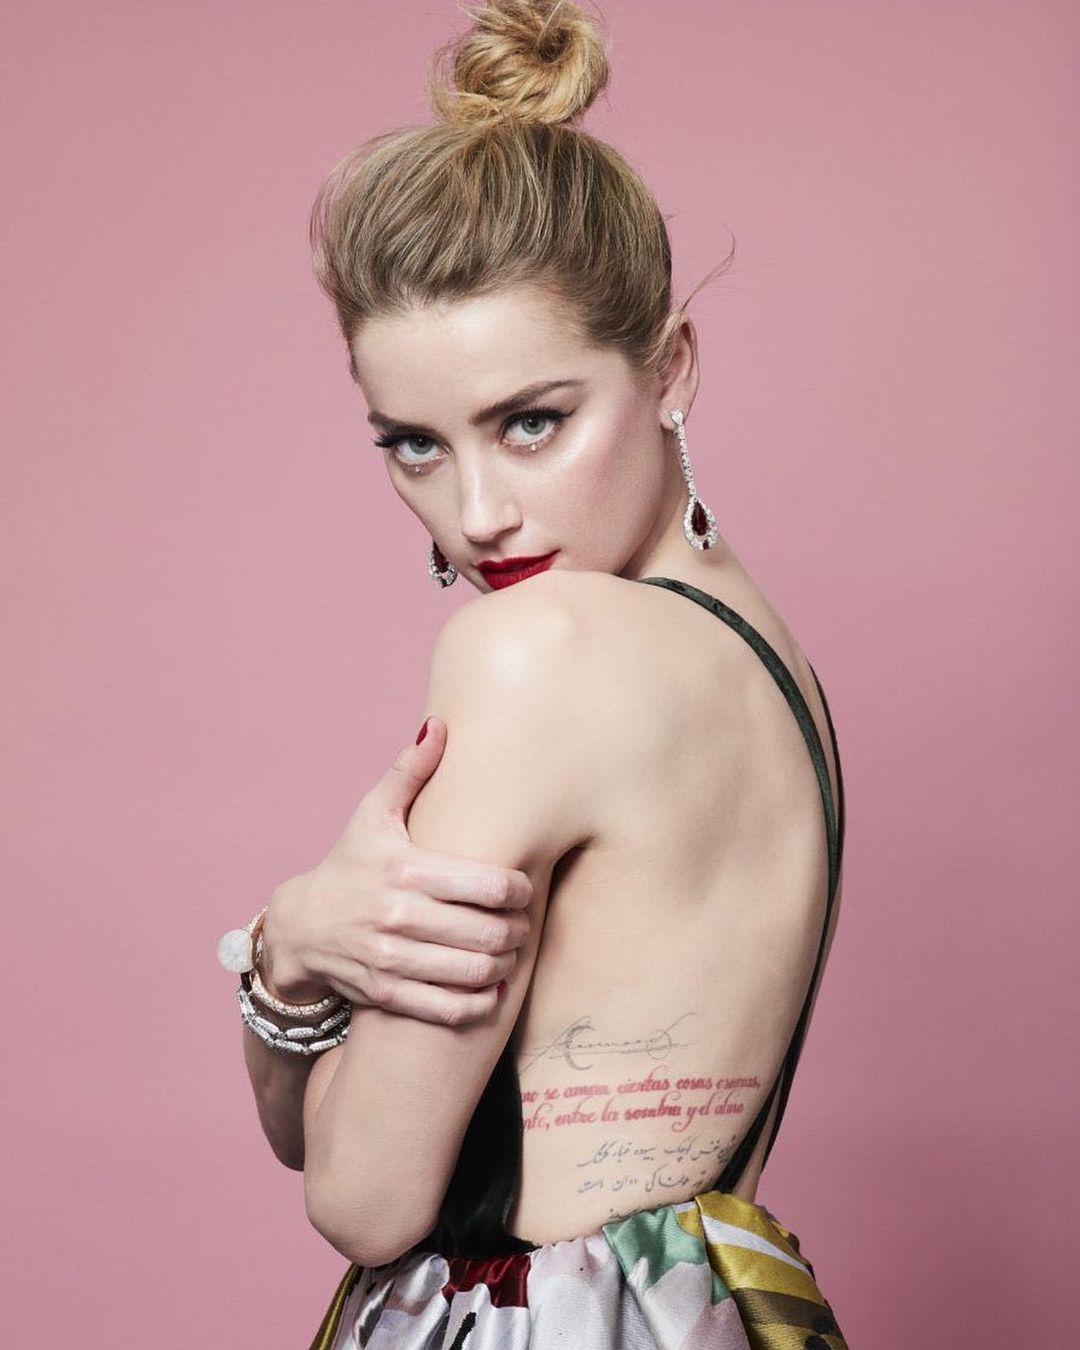 Amber Heard's tattoos and meaning